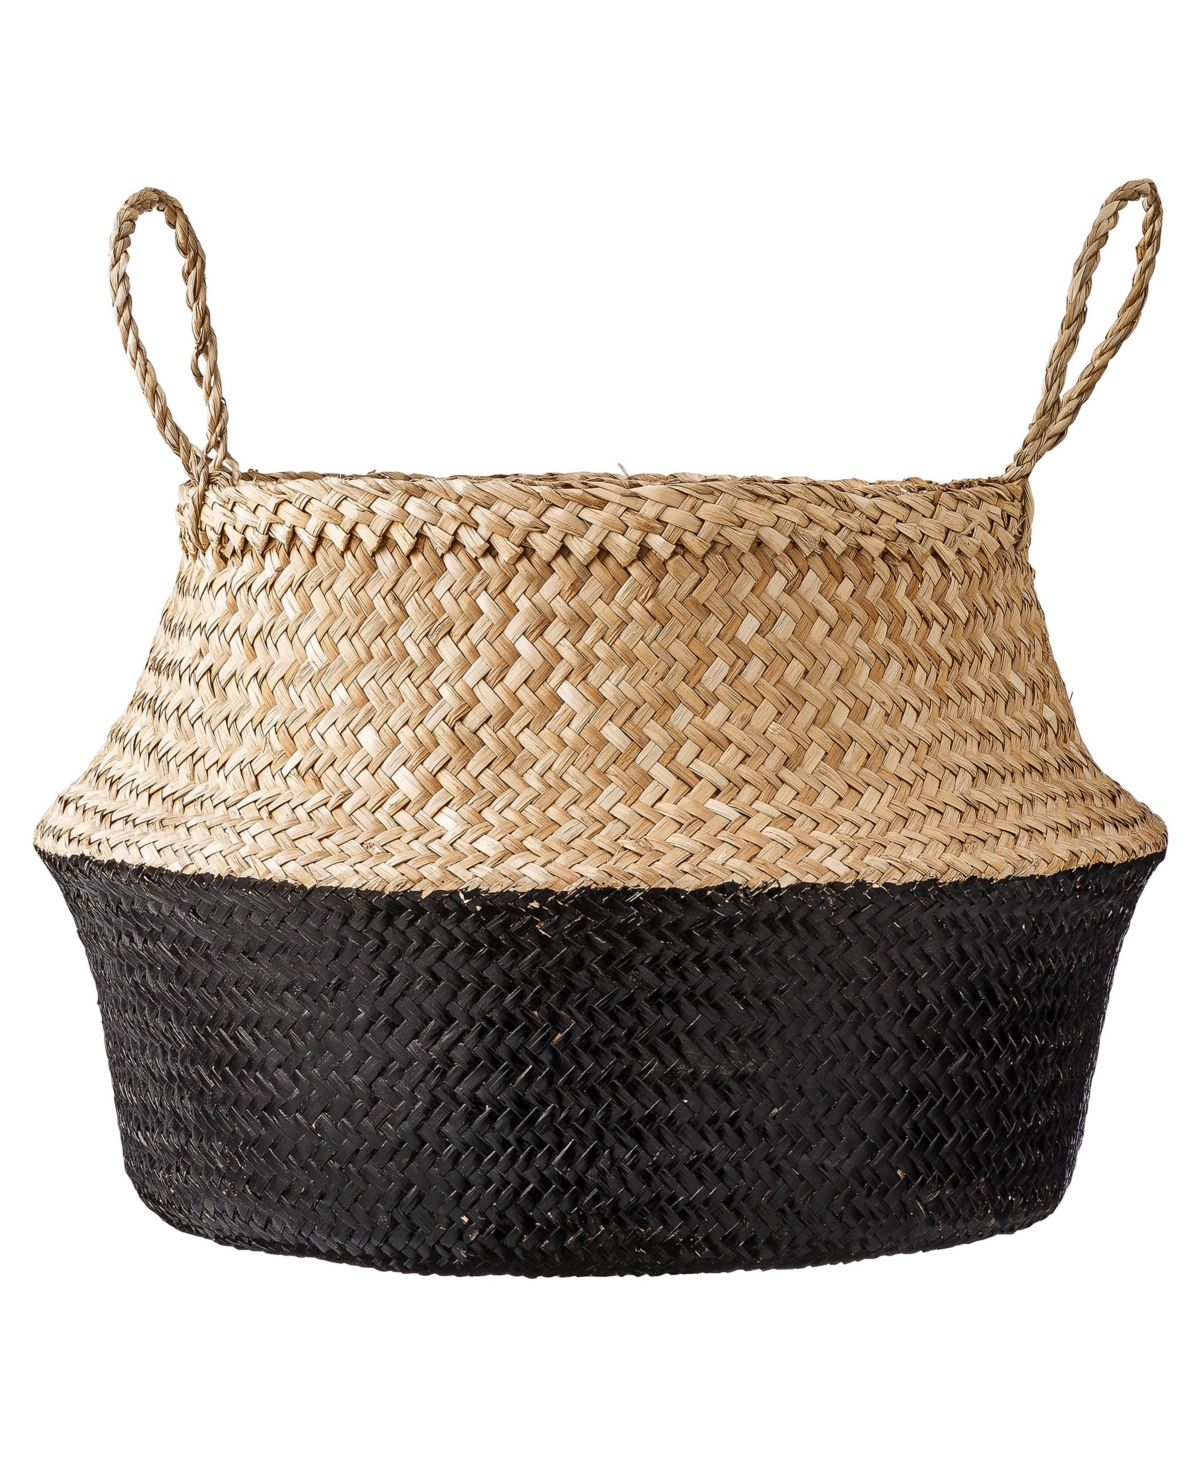 Bloomingville Handwoven Seagrass Basket Storage With Handles, Natural And Black